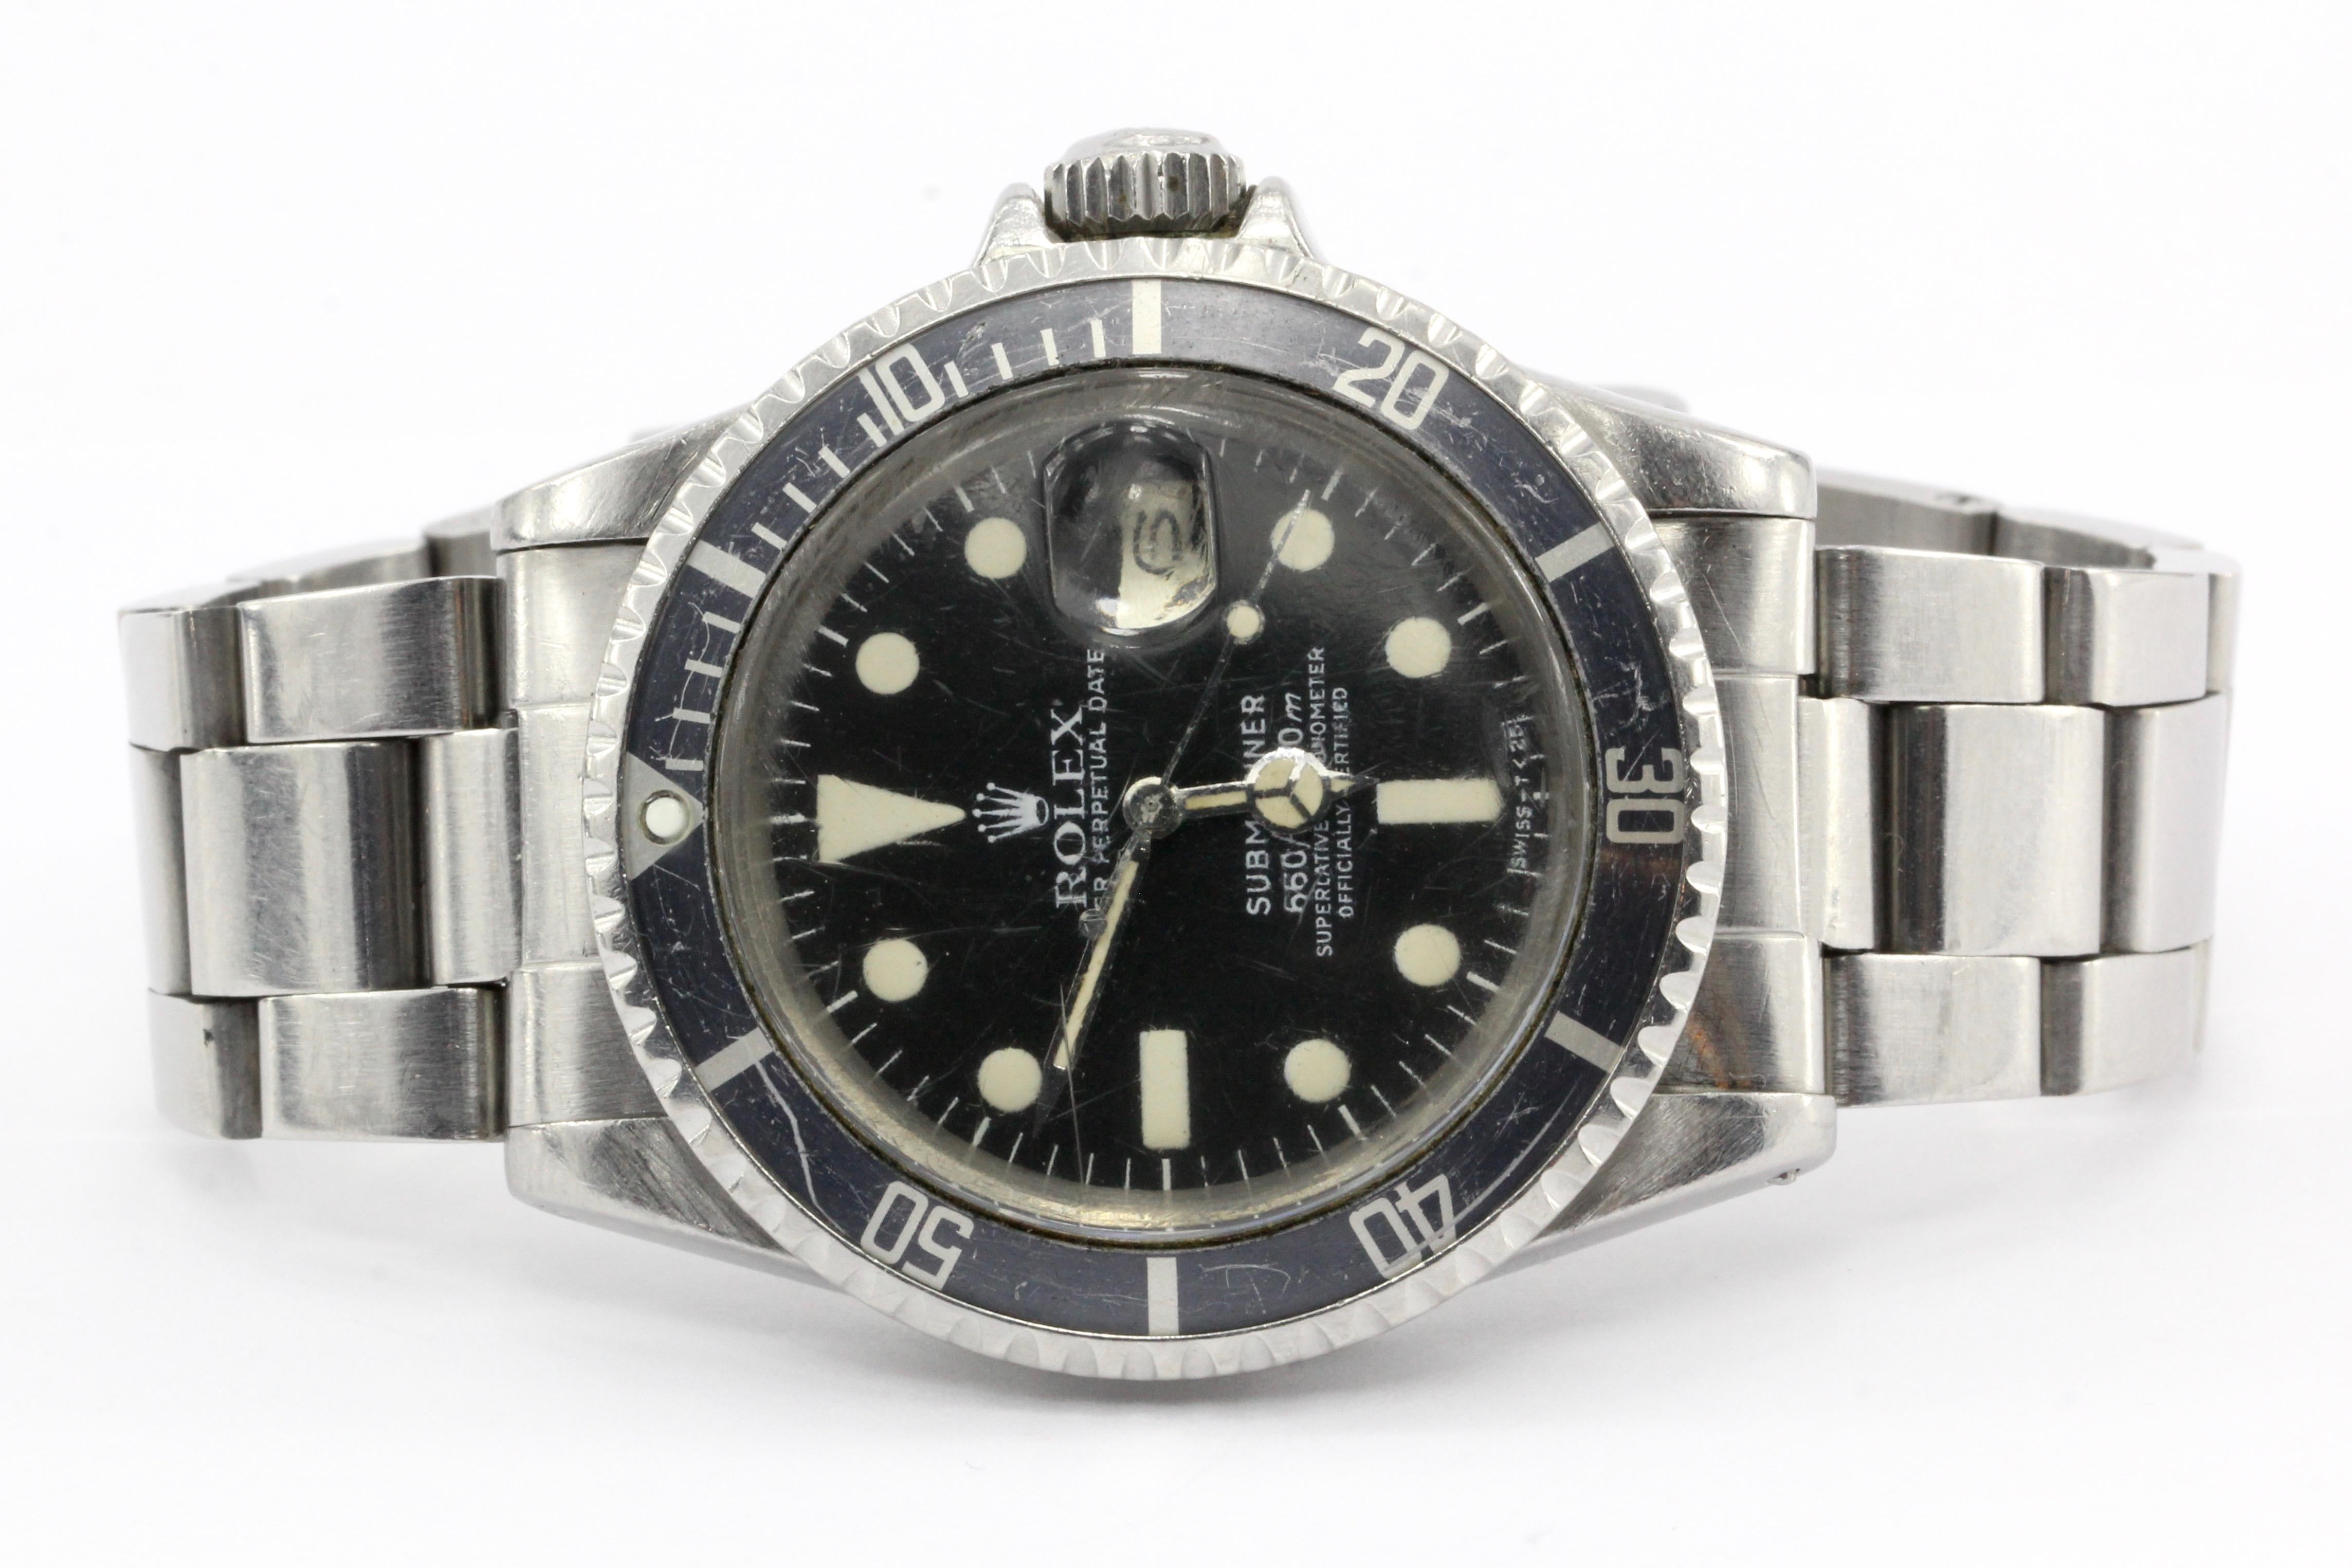 Manufacturer: Rolex

Model: Submariner 1680

Serial/Year: 5,6XX,XXX - 1978

Purchased in 1980 from Saddik & Mohamed Attar Co located in Saudi Arabia. They are still in business today!

Mark 1 dial

Creamy patina on dial

Never polished

Comes with